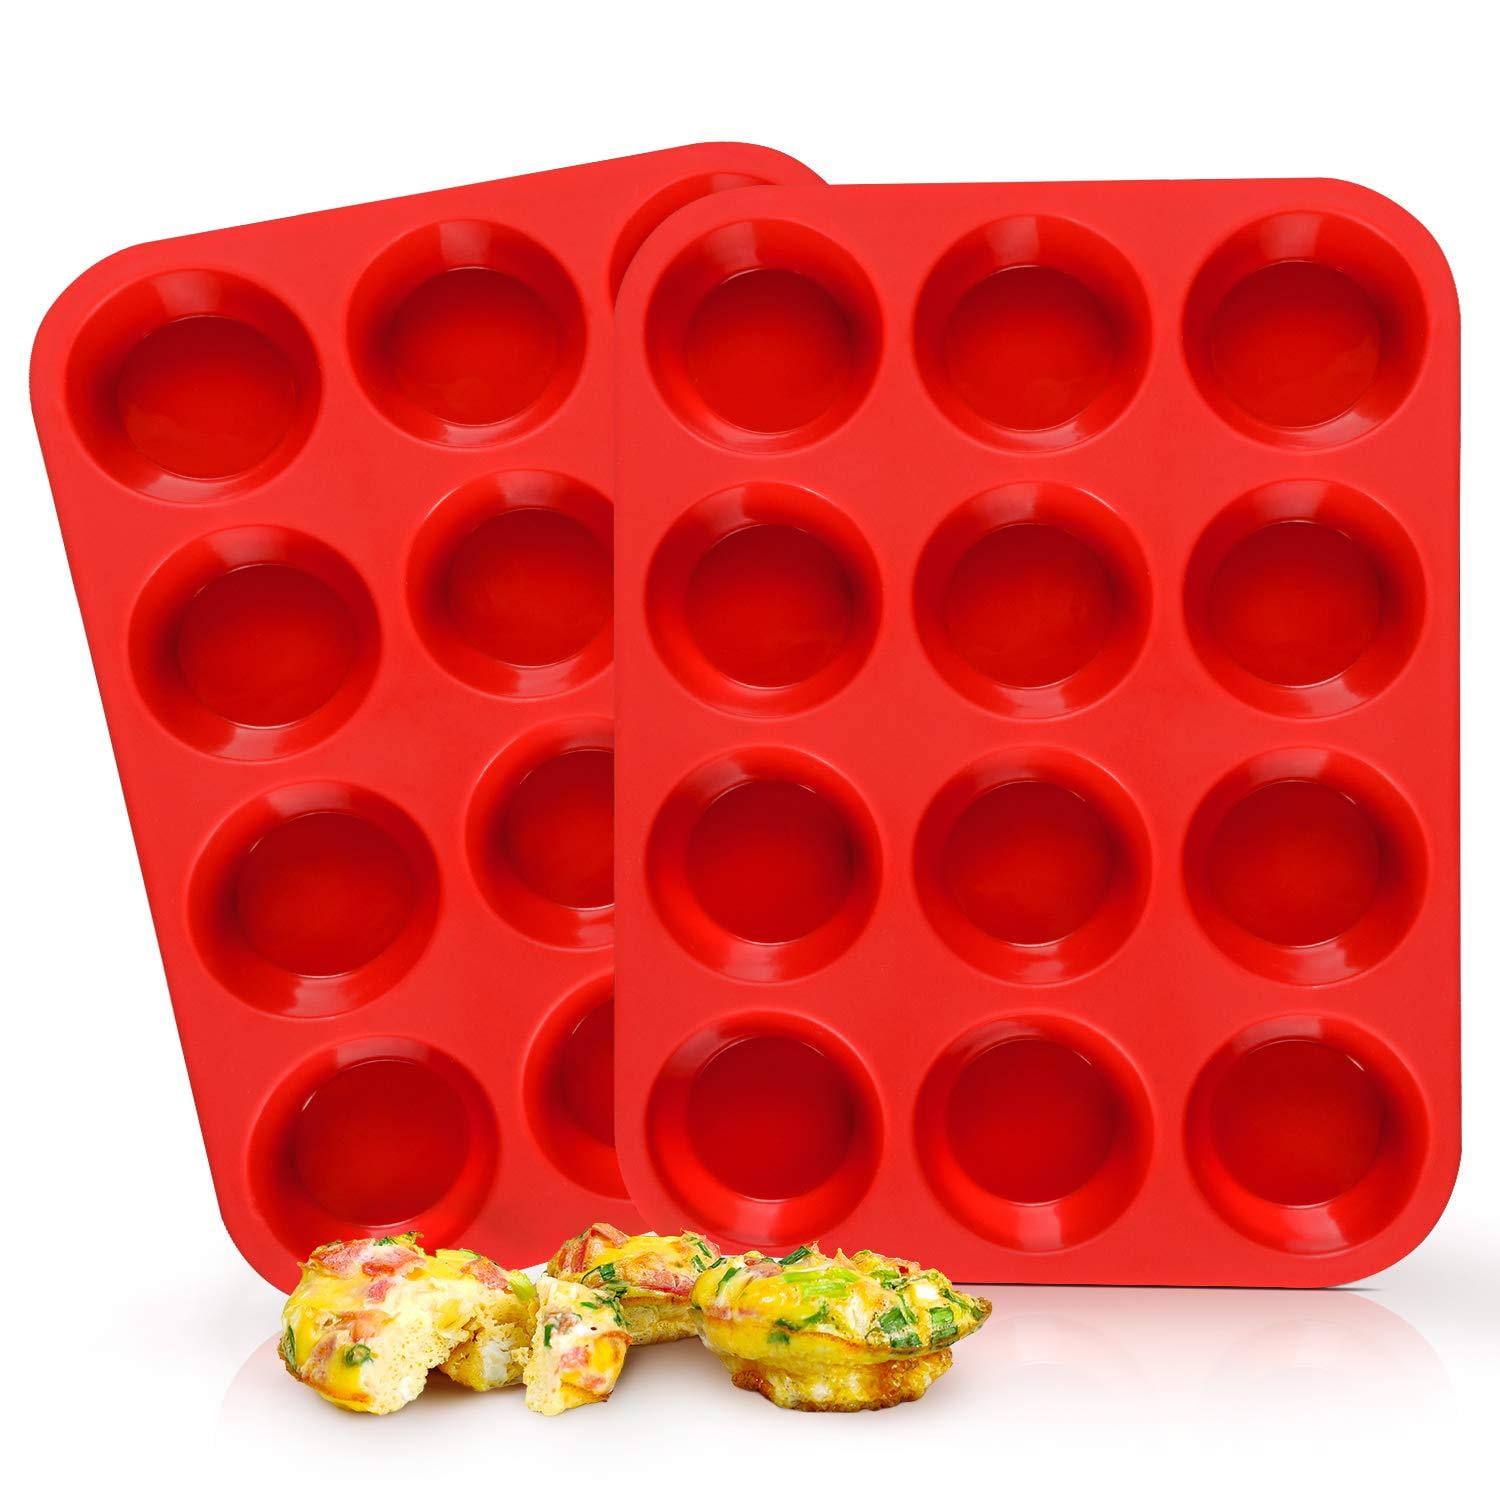 Large 7 Cavity Non-Stick Silicone Muffin Mould Tray Baking Moulds Pudding Mold 